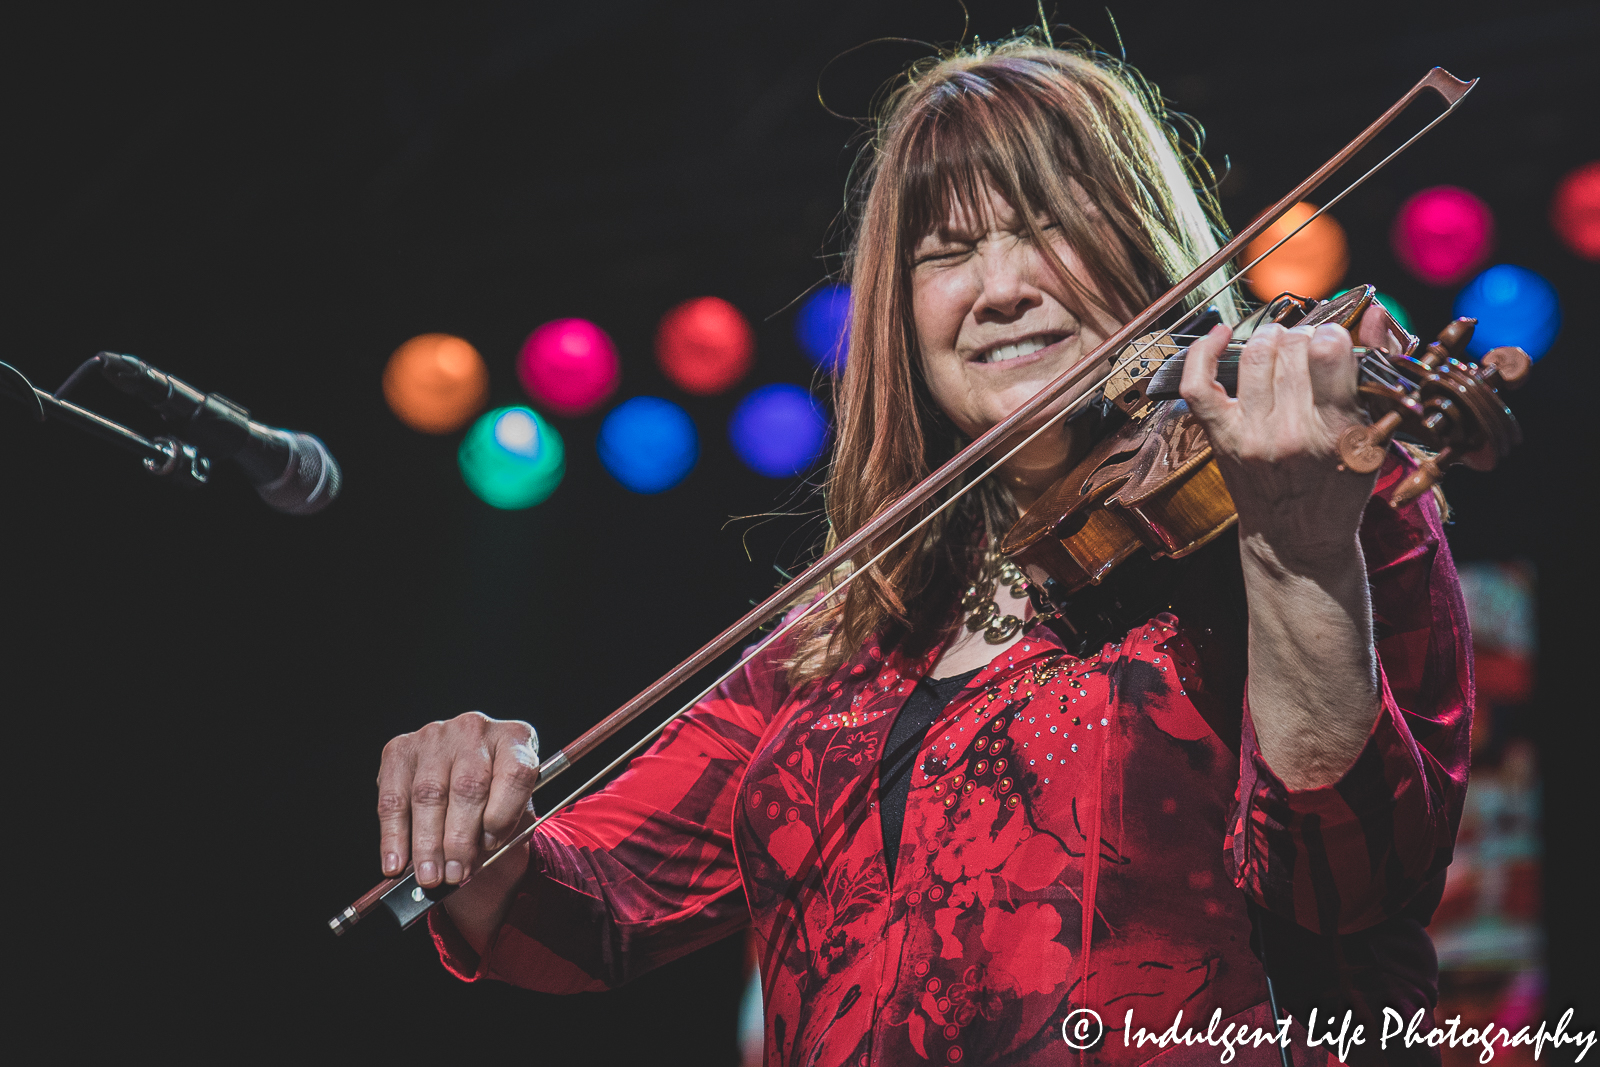 Violinist Janet Jameson of Shooting Star live in concert at Ameristar Casino's Star Pavilion in Kansas City, MO on April 9, 2022.